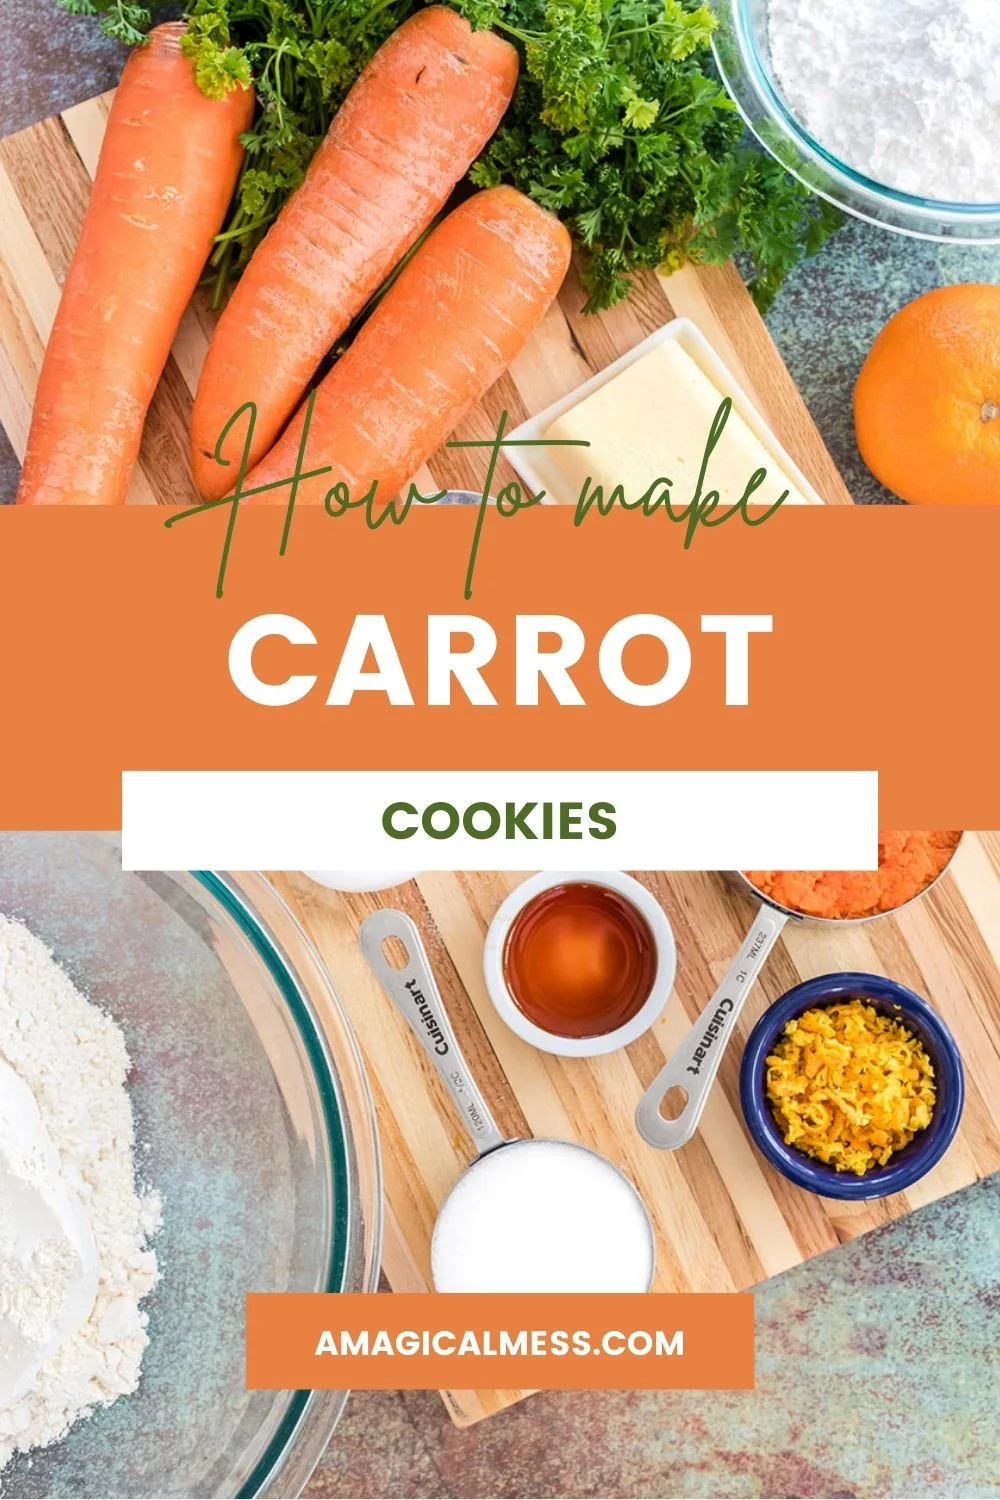 Carrots and other ingredients to make cookies on a board.